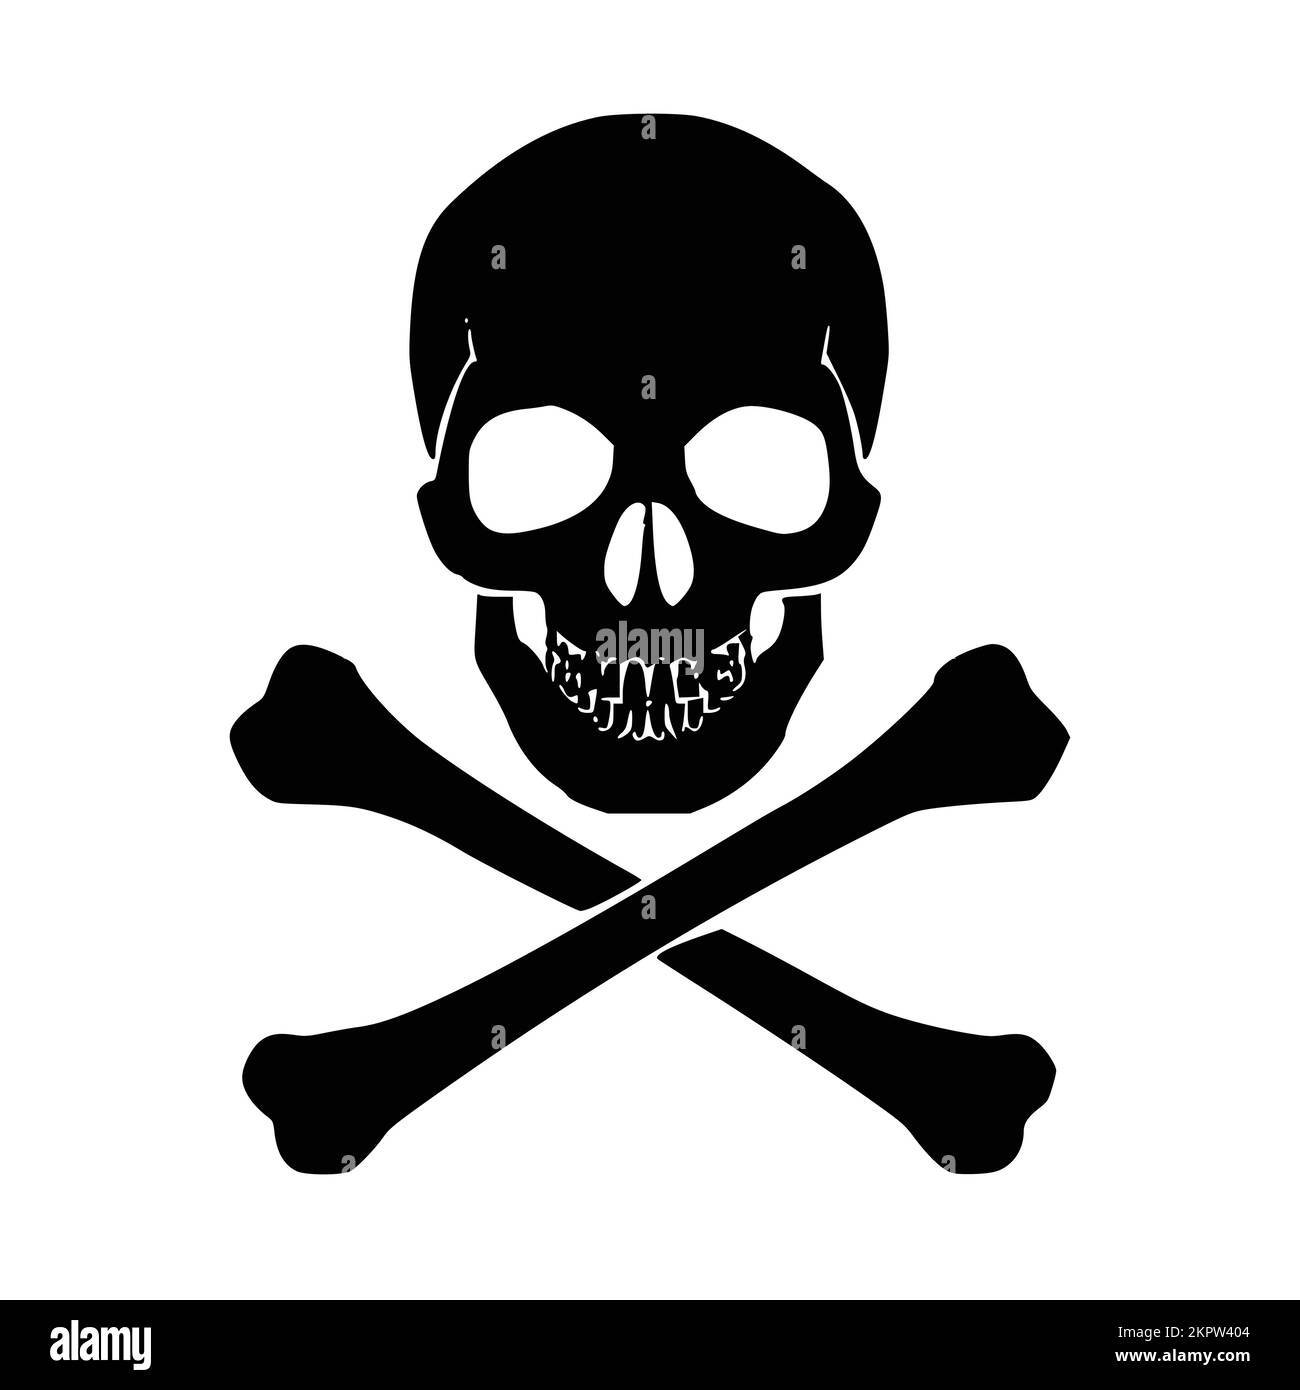 classic skull and crossbones symbol silhouette isolated on white background vector Stock Vector